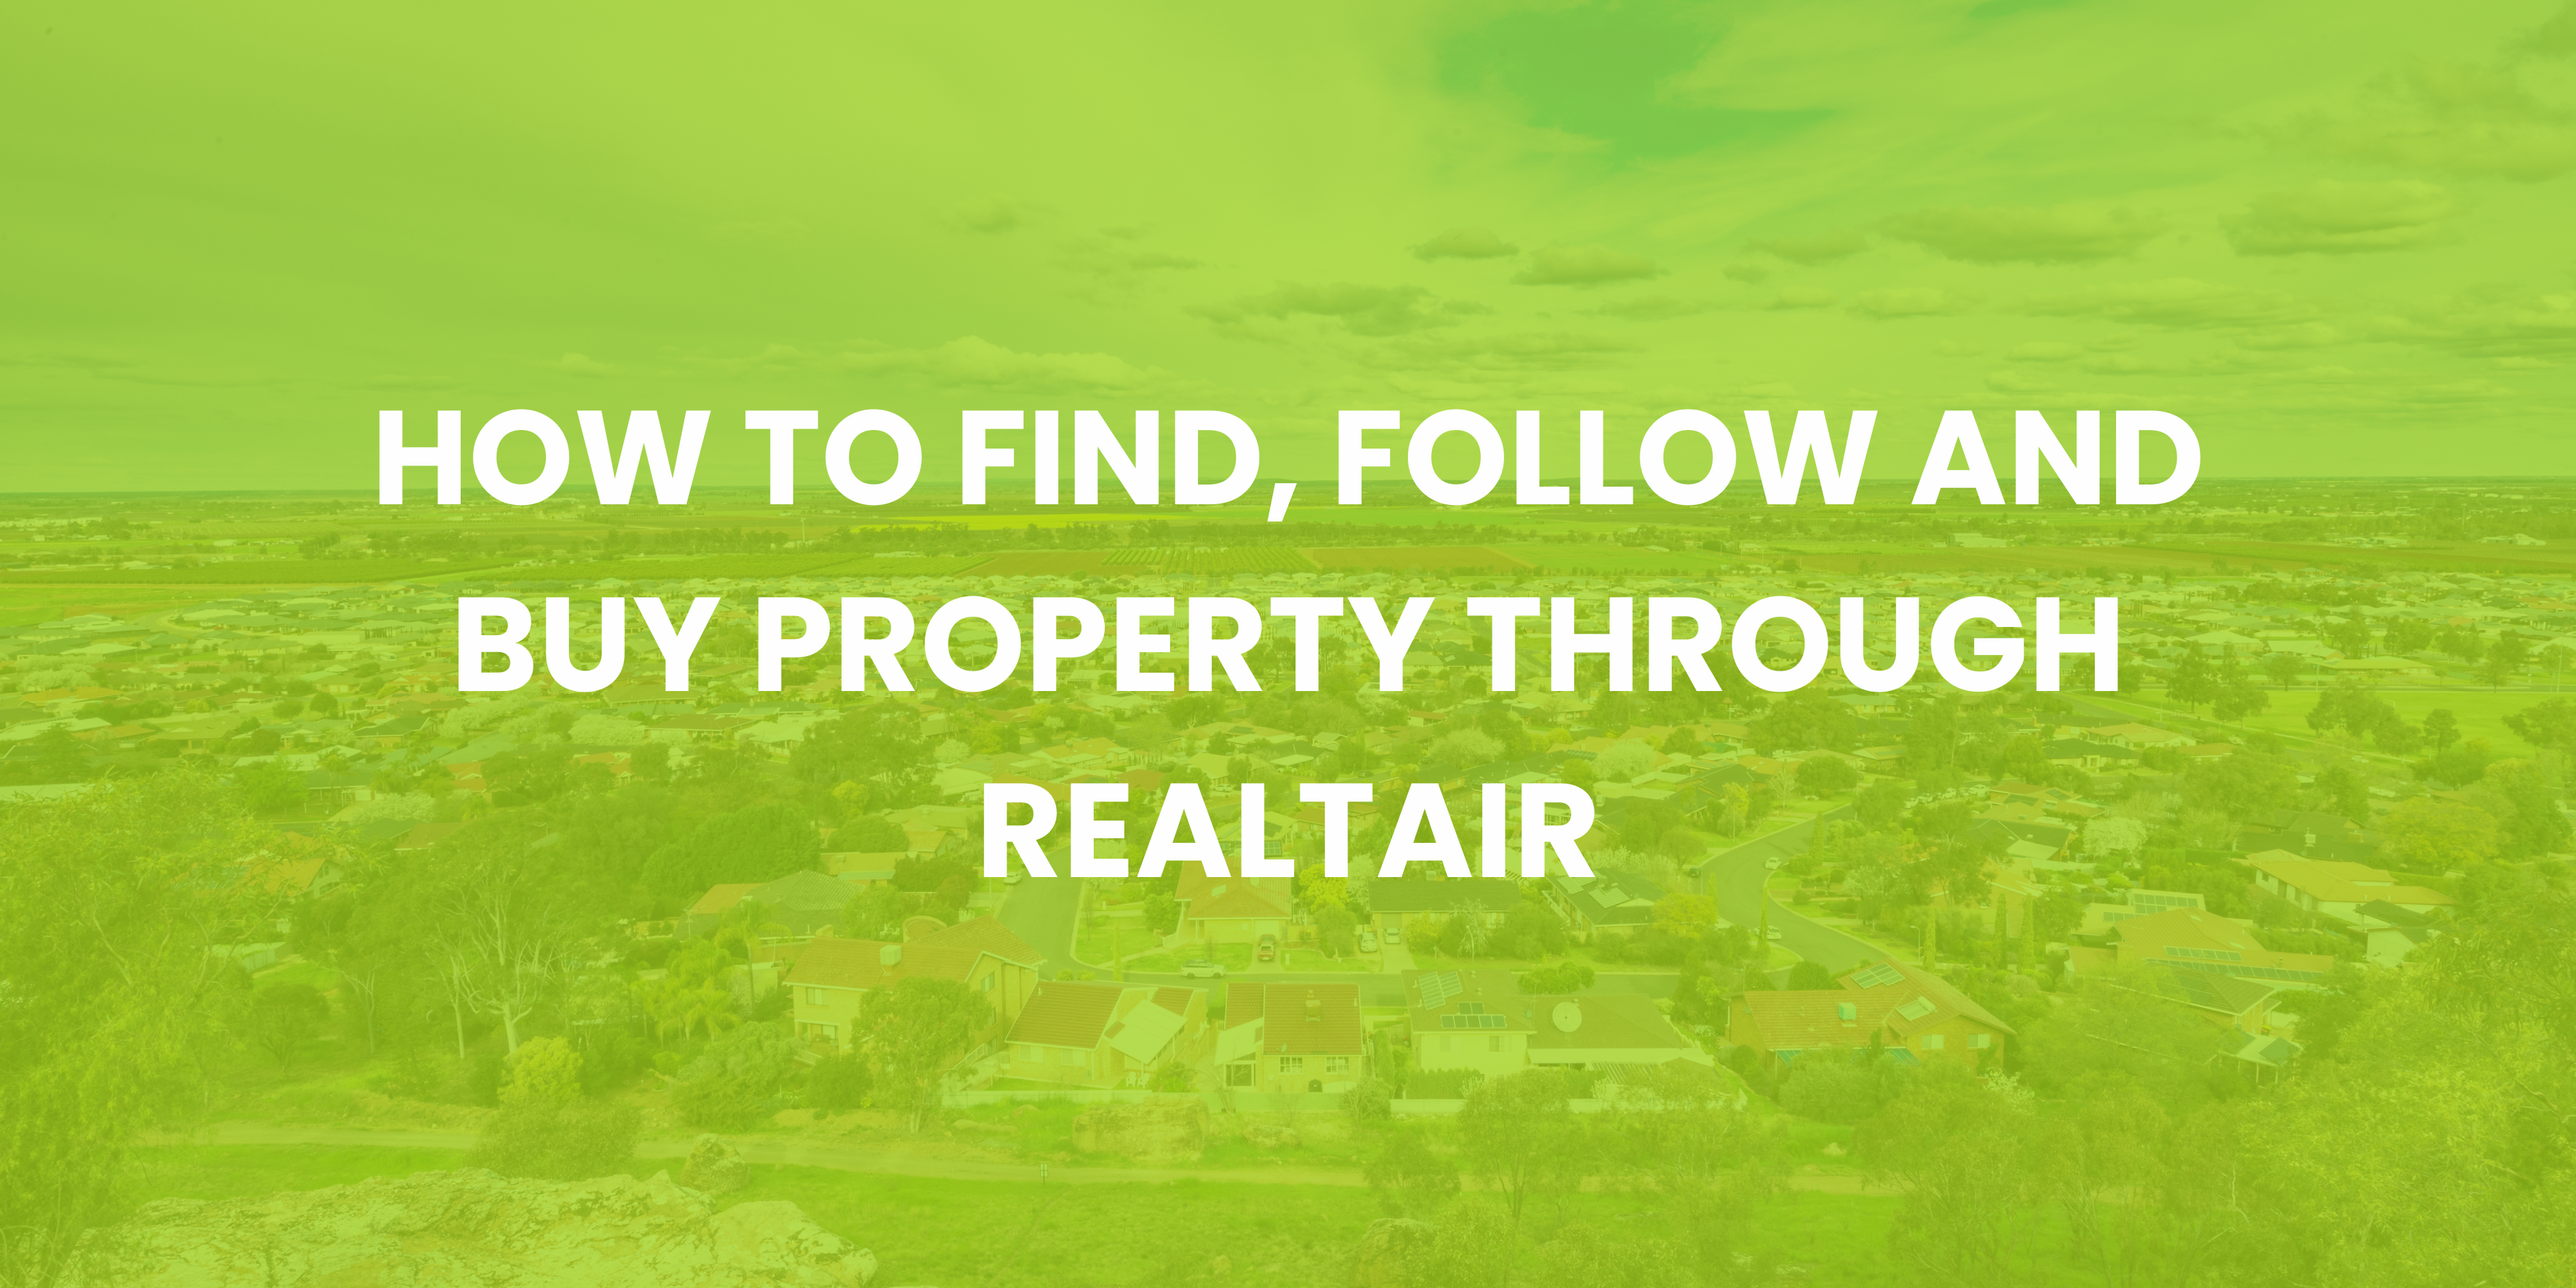 How to find, follow and buy property through Realtair